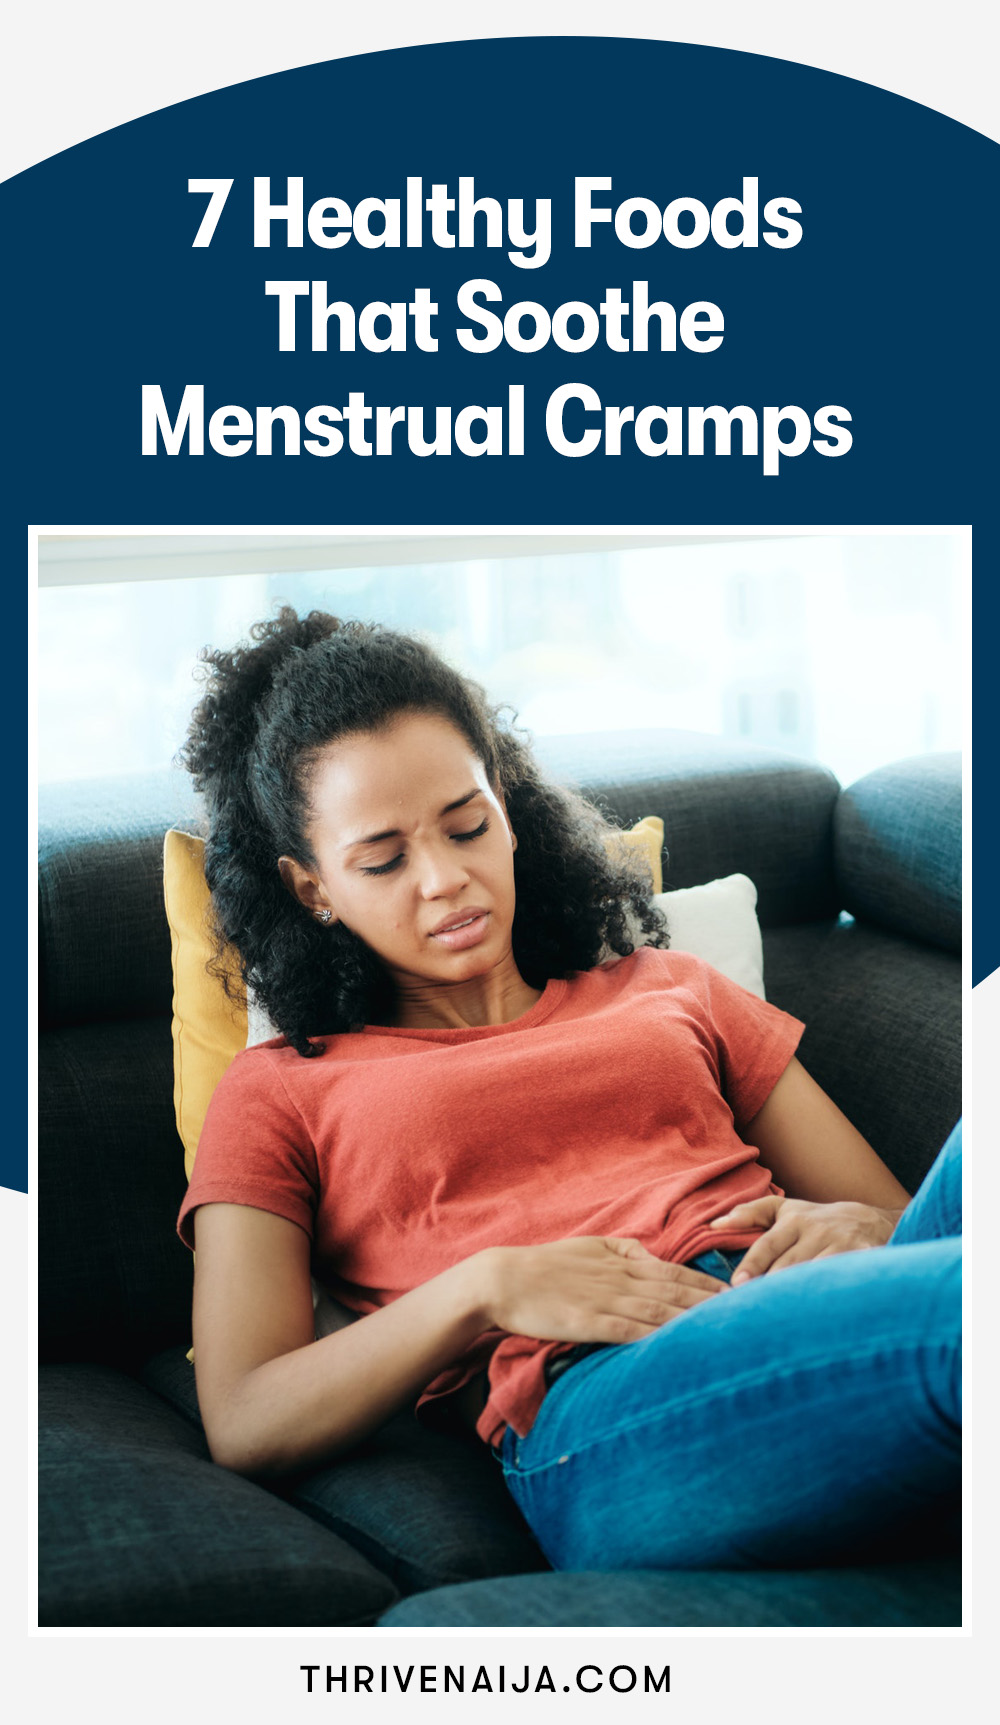 7 Healthy Foods That Soothe Menstrual Cramps